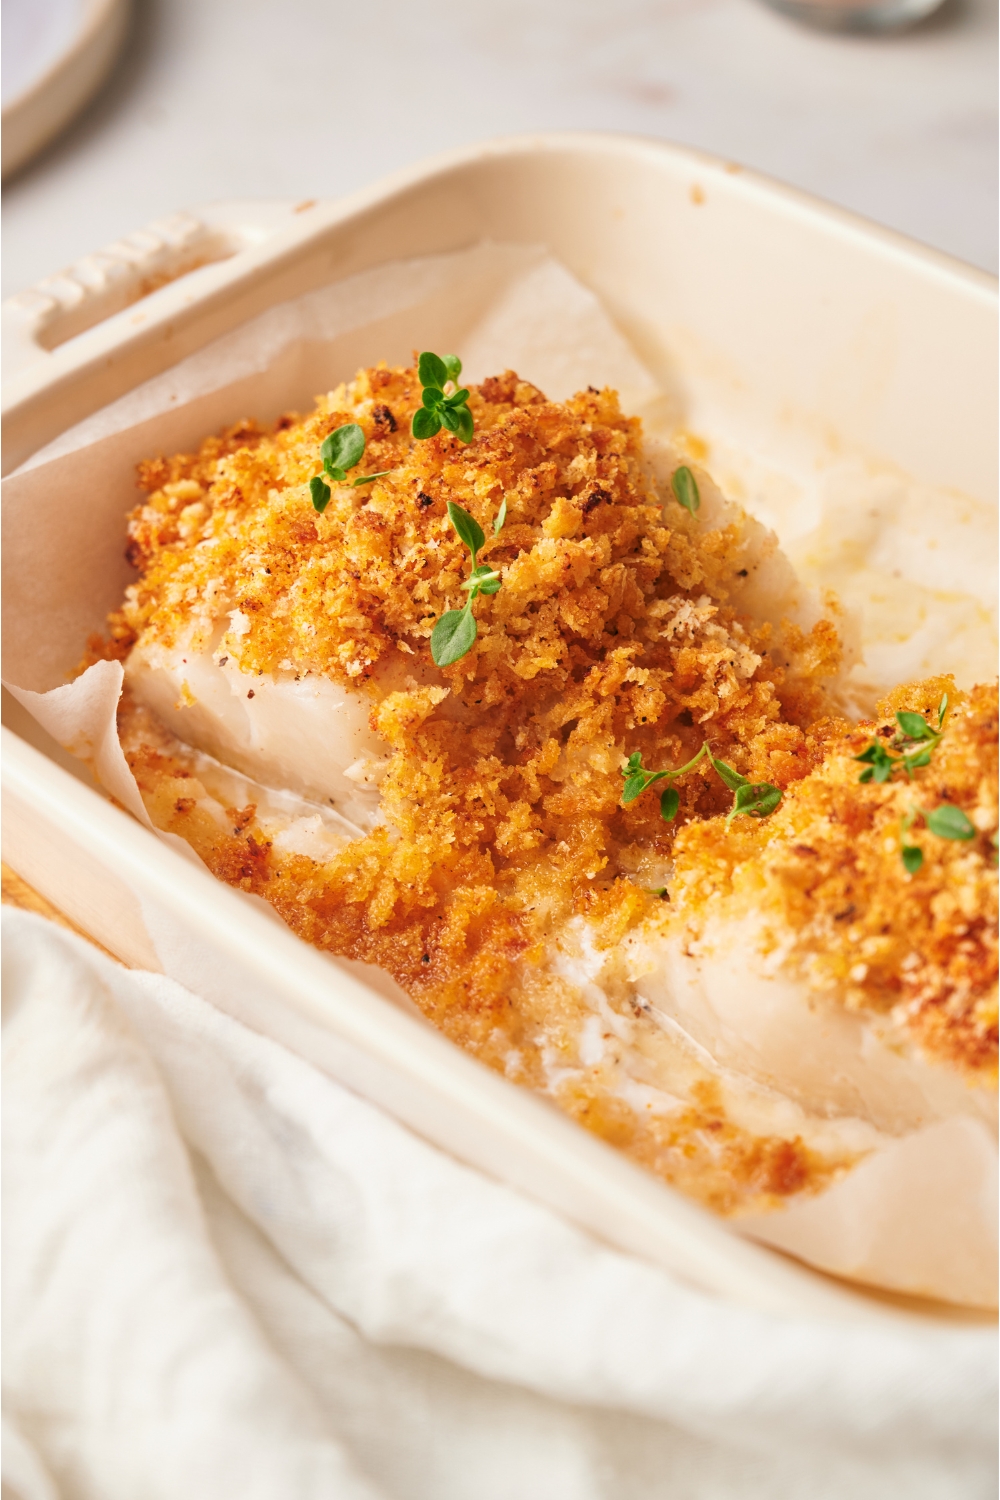 Baked cod topped with a golden brown seasoned crust and garnished with fresh herbs.